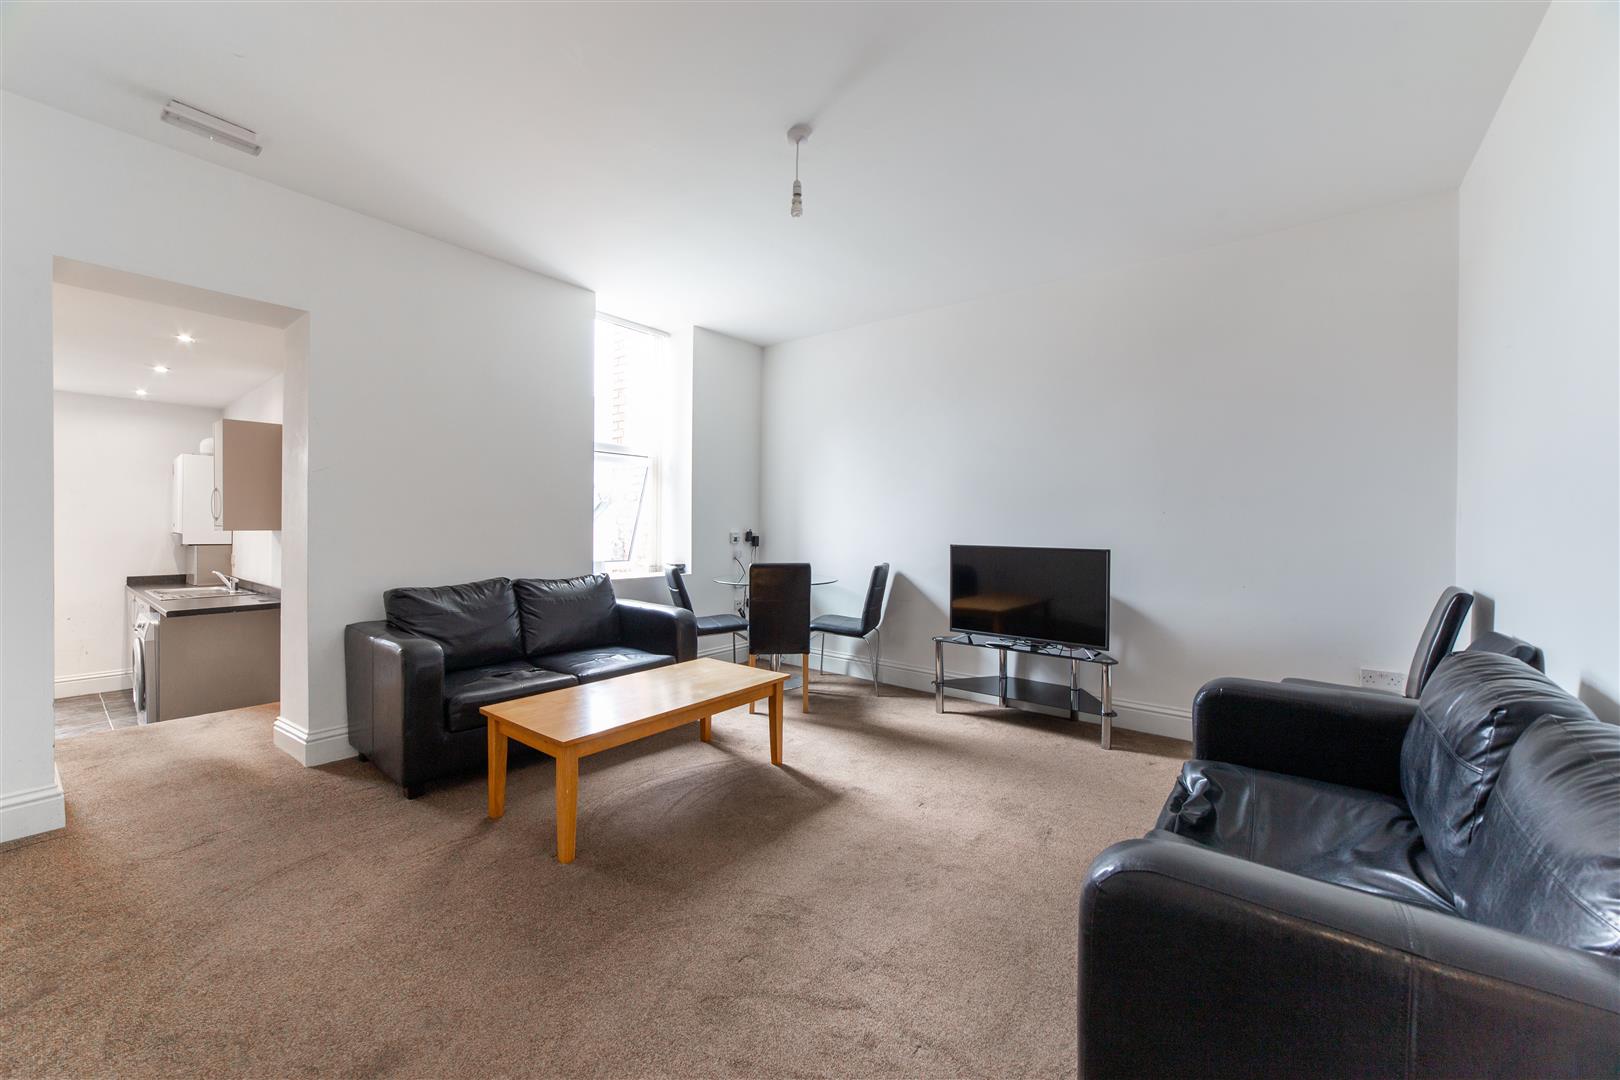 4 bed maisonette to rent in Chillingham Road, Heaton - Property Image 1